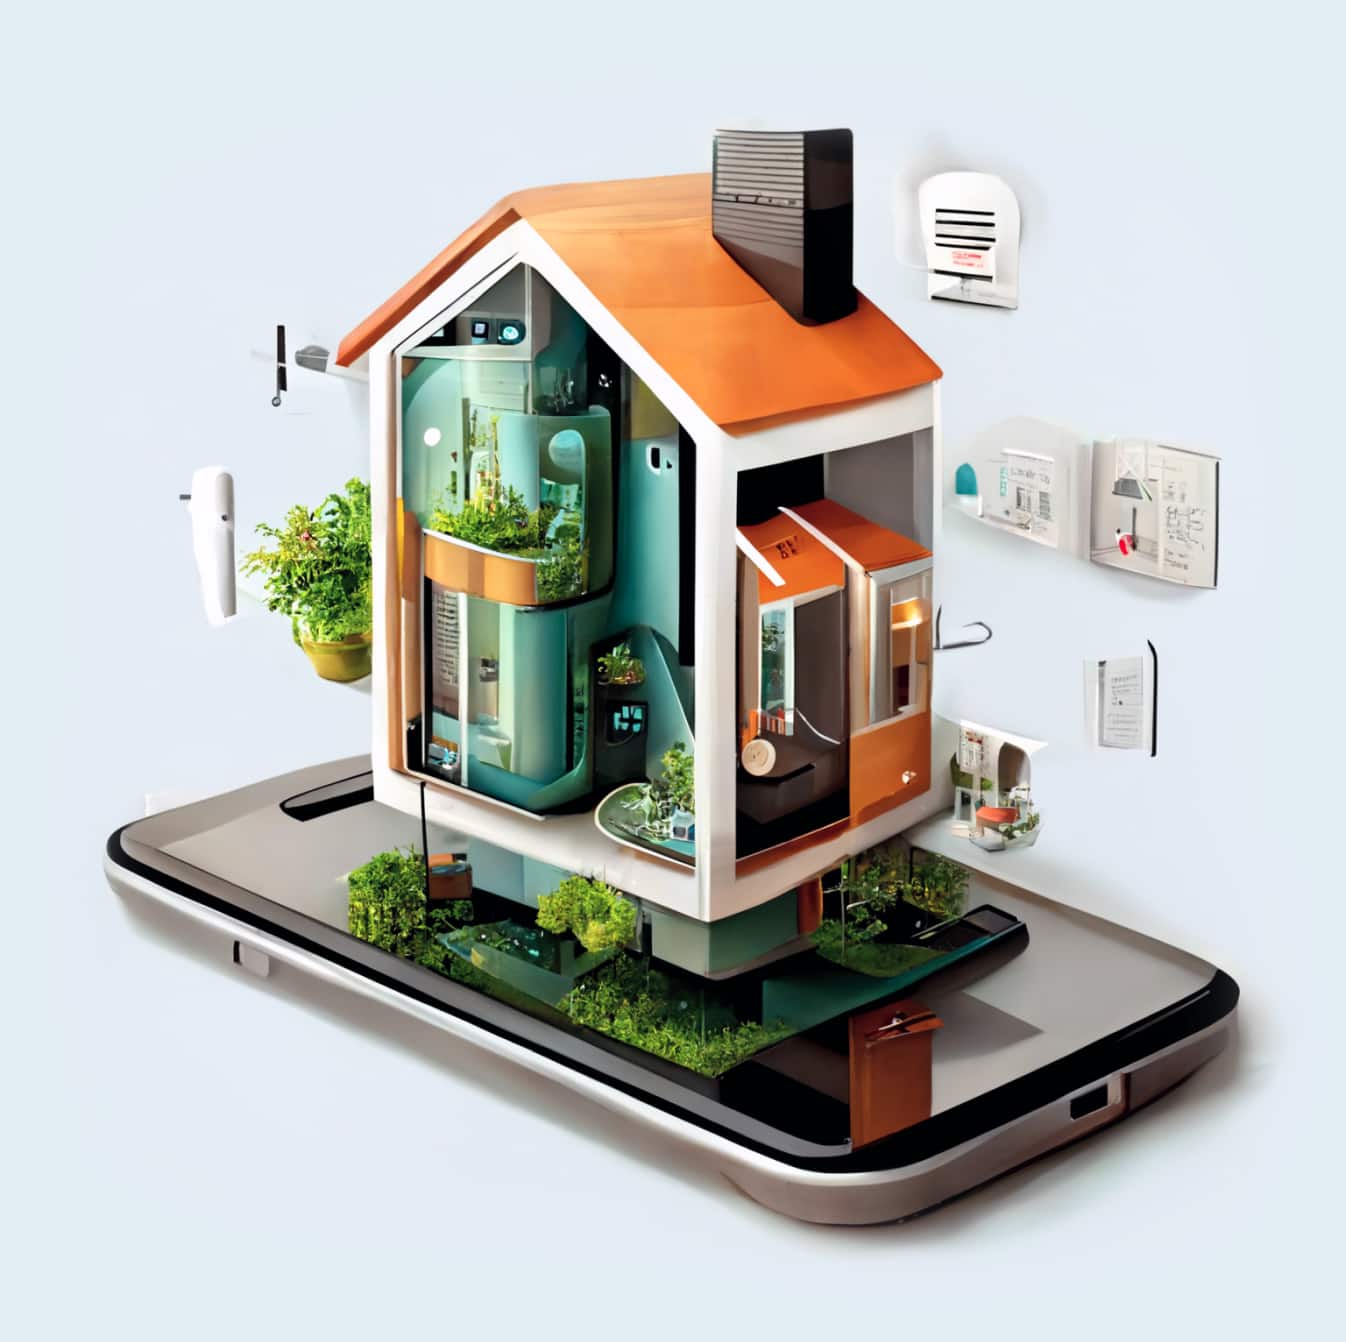 Smart Home Applications & Automation Software